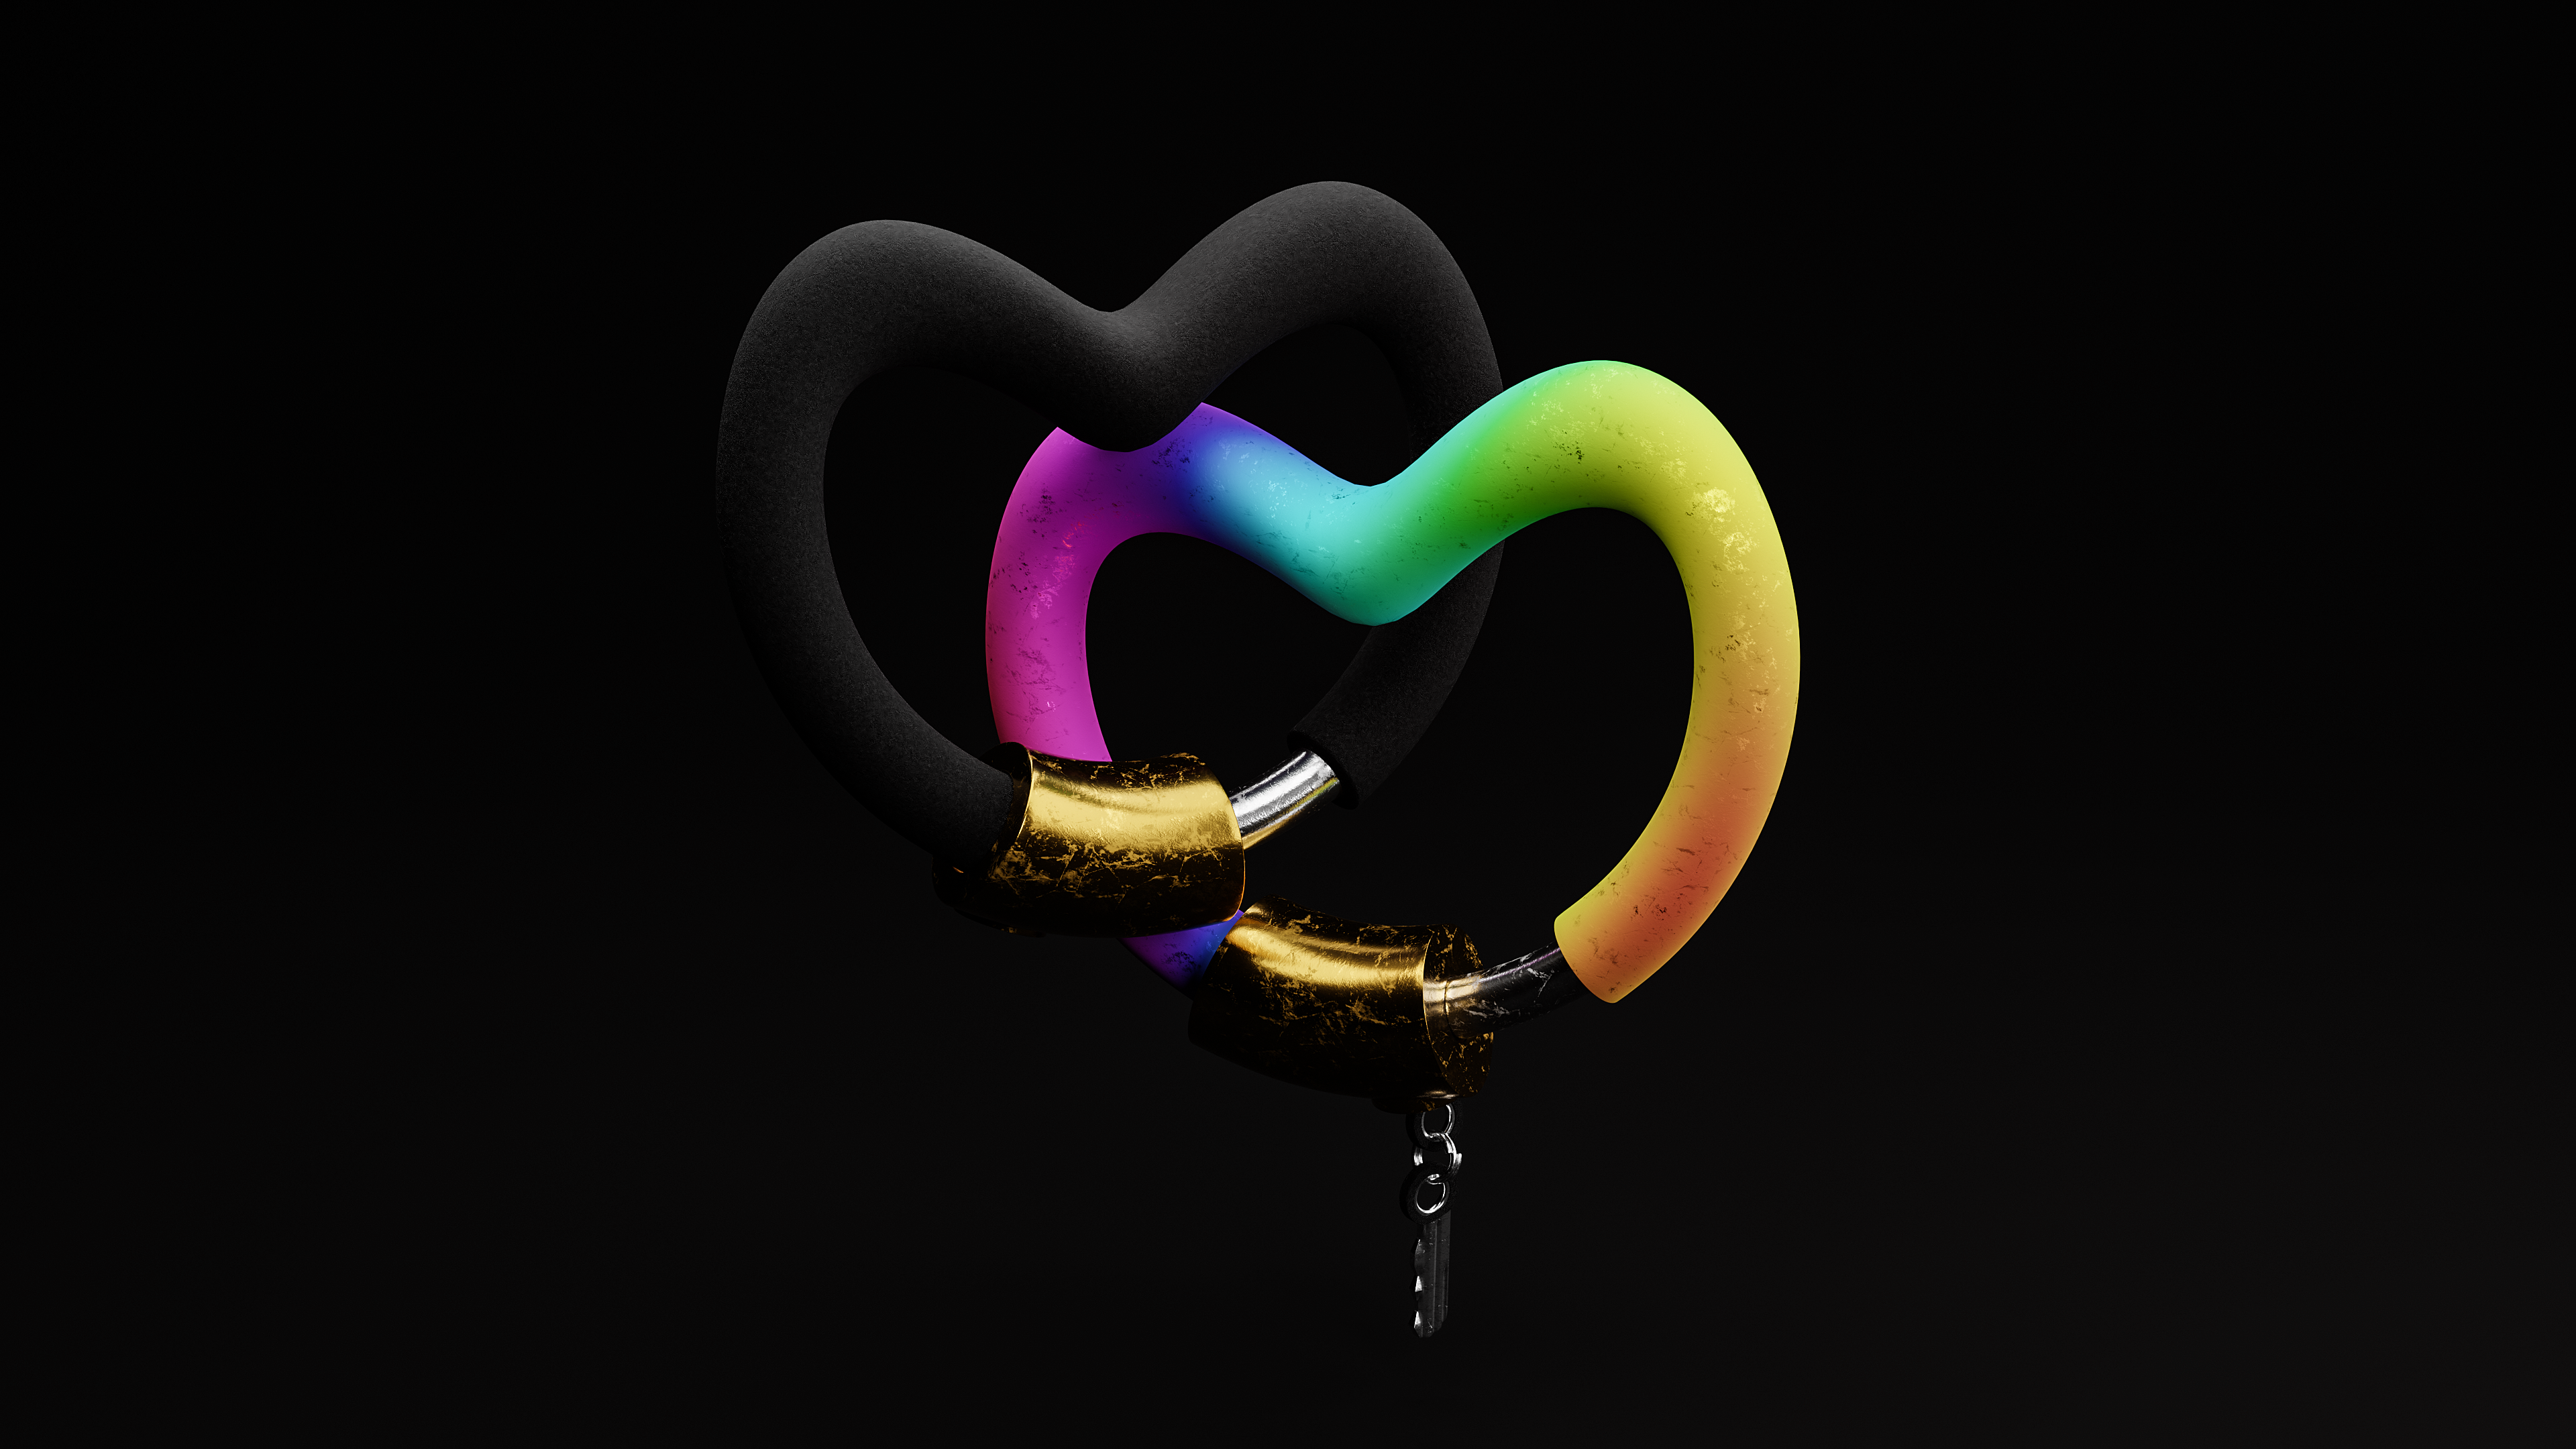 General 3840x2160 CGI digital art abstract 3D Abstract love heart minimalism colorful